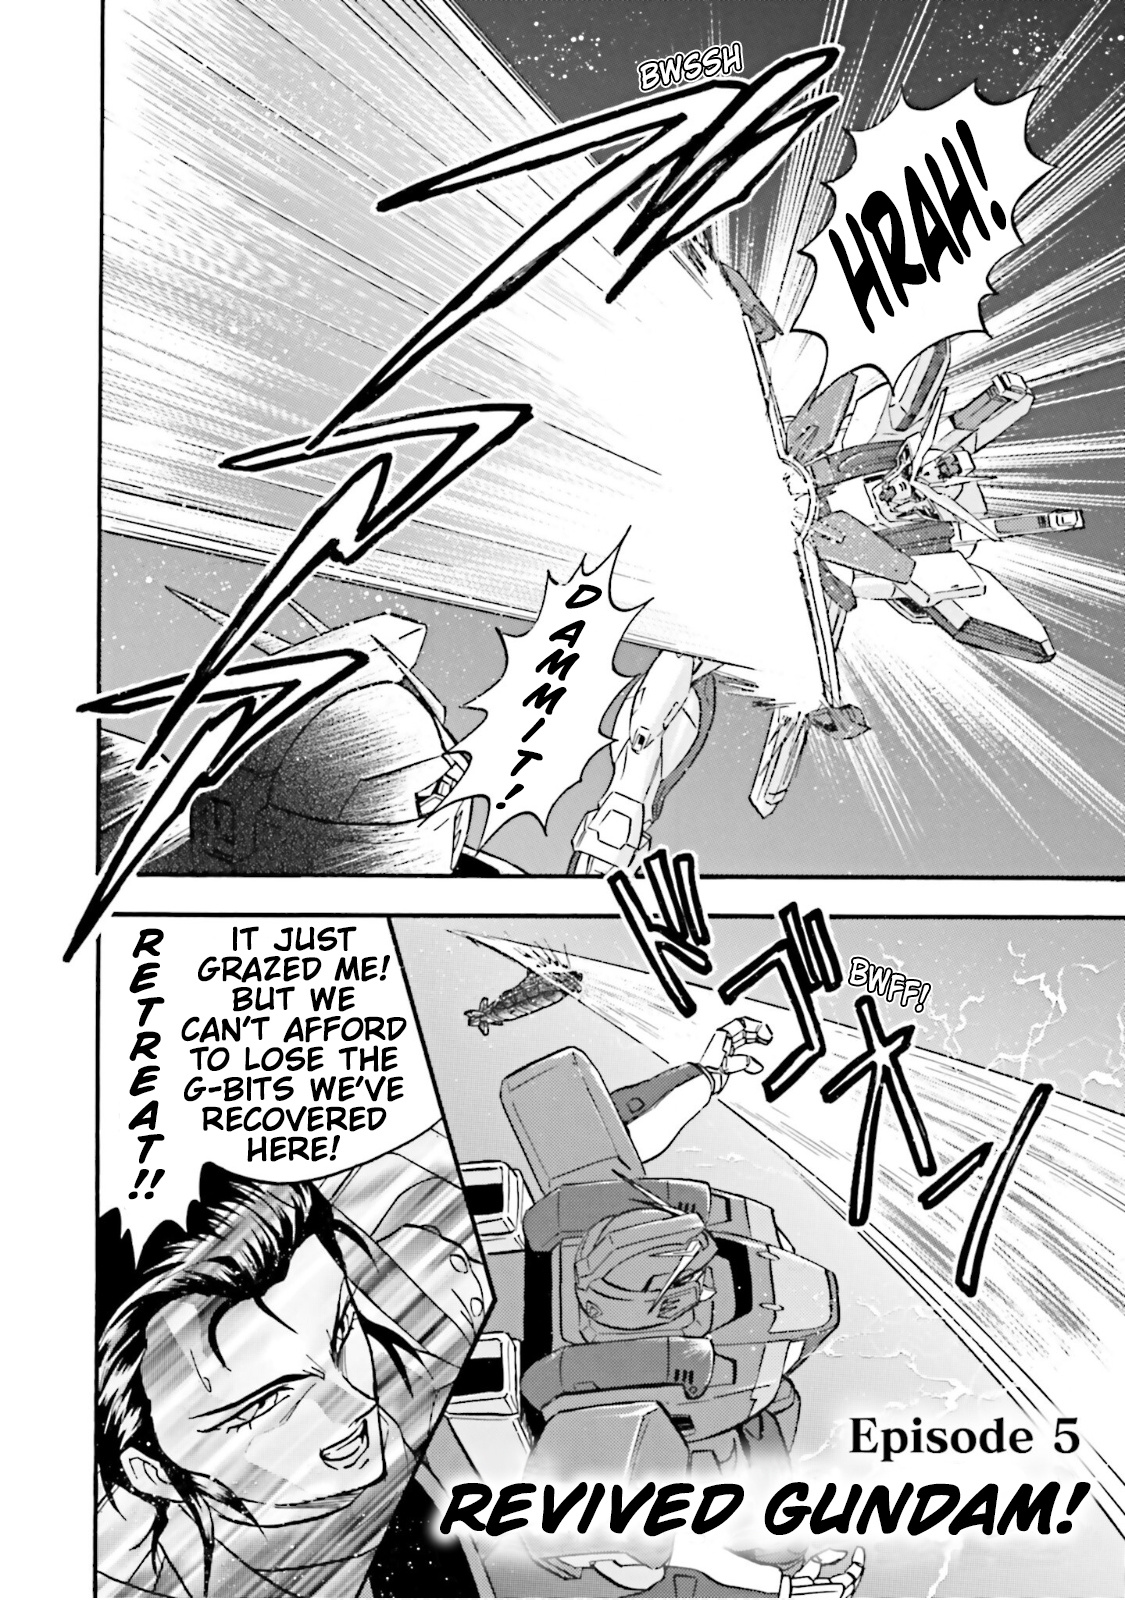 After War Gundam X Re:master Edition Vol.2 Chapter 5: Revived Gundam! - Picture 2